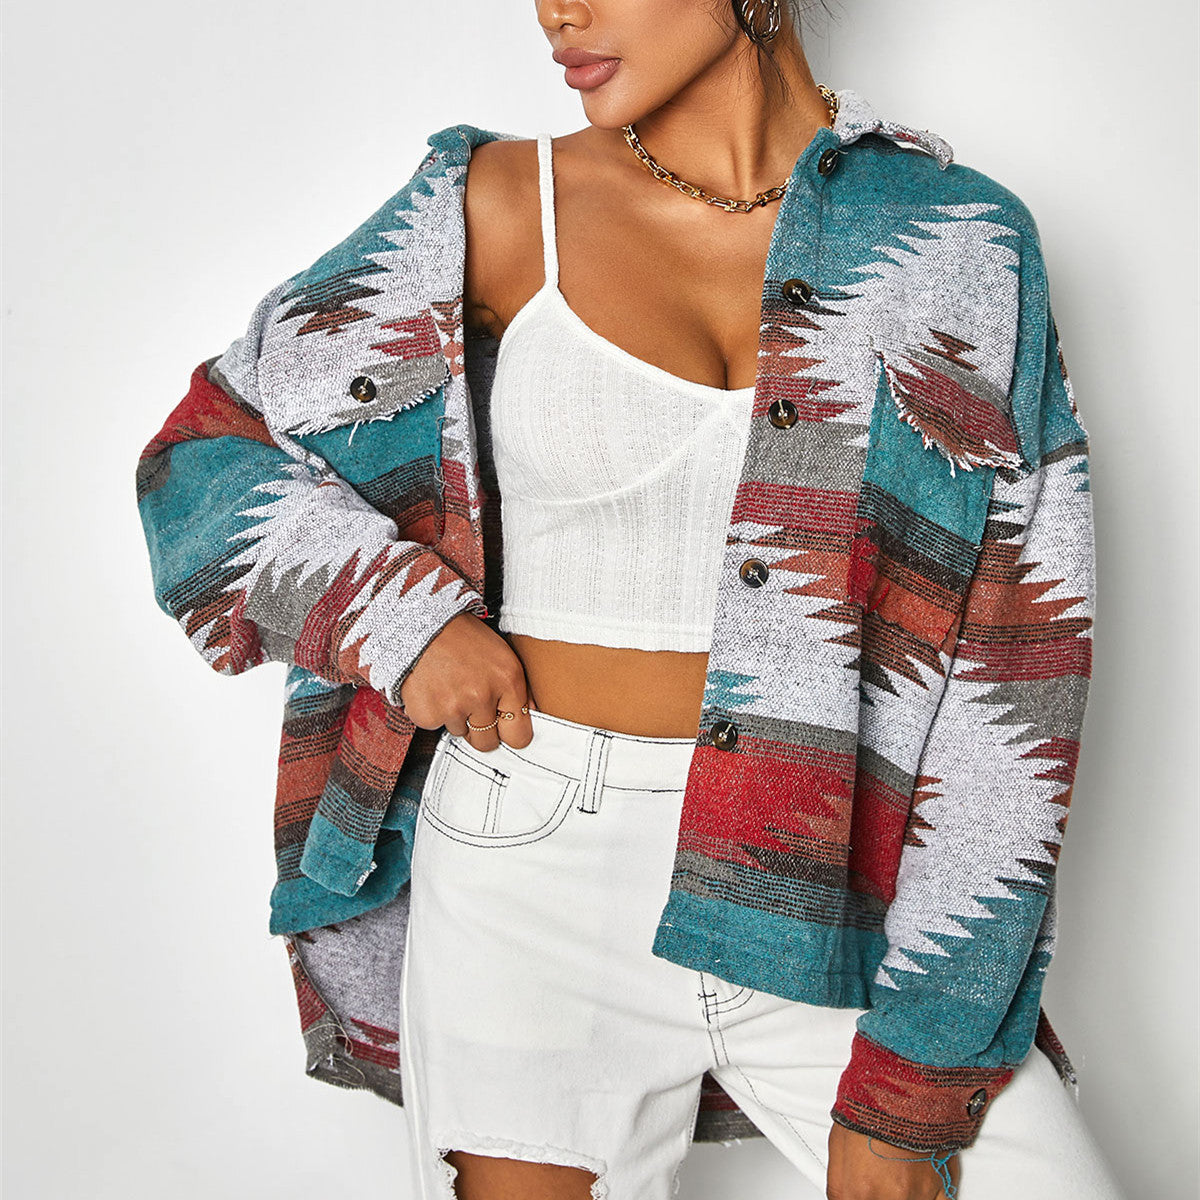 Women's Ethnic Style Hawaiian Beach Shirt – embrace cultural diversity with this stylish top.